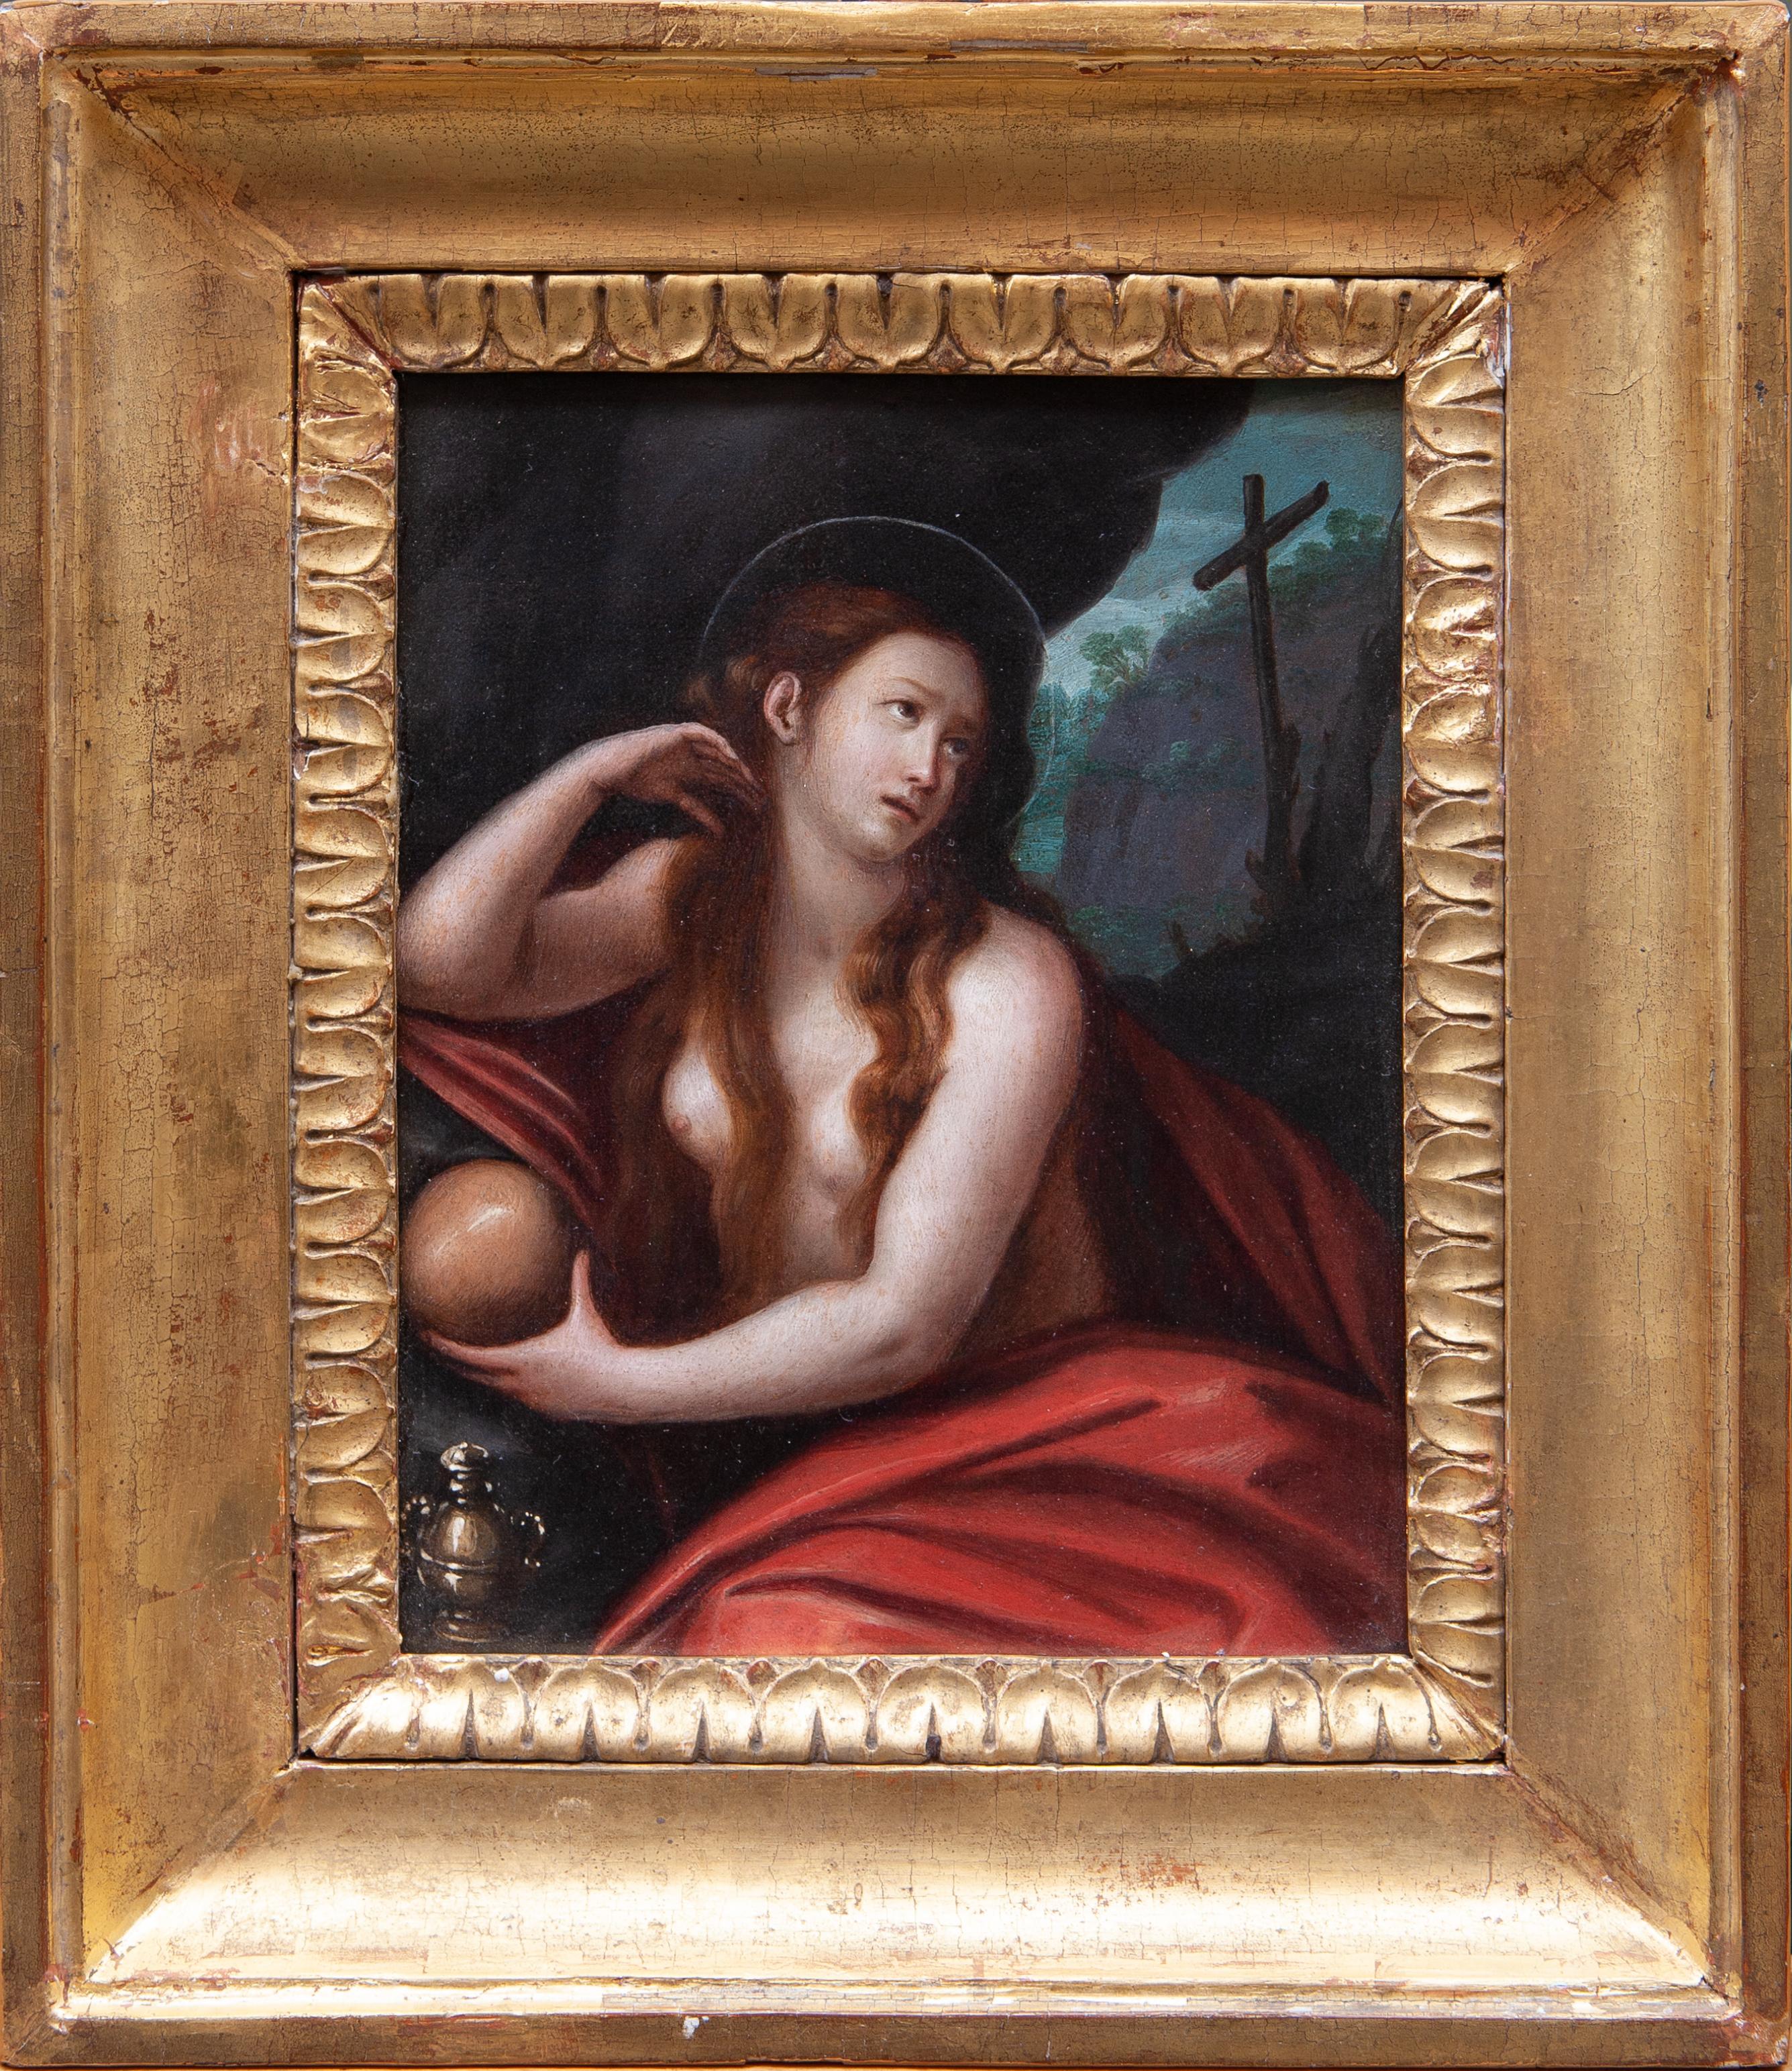 Unknown Figurative Painting - Penitent Magdalene - 17th century painter